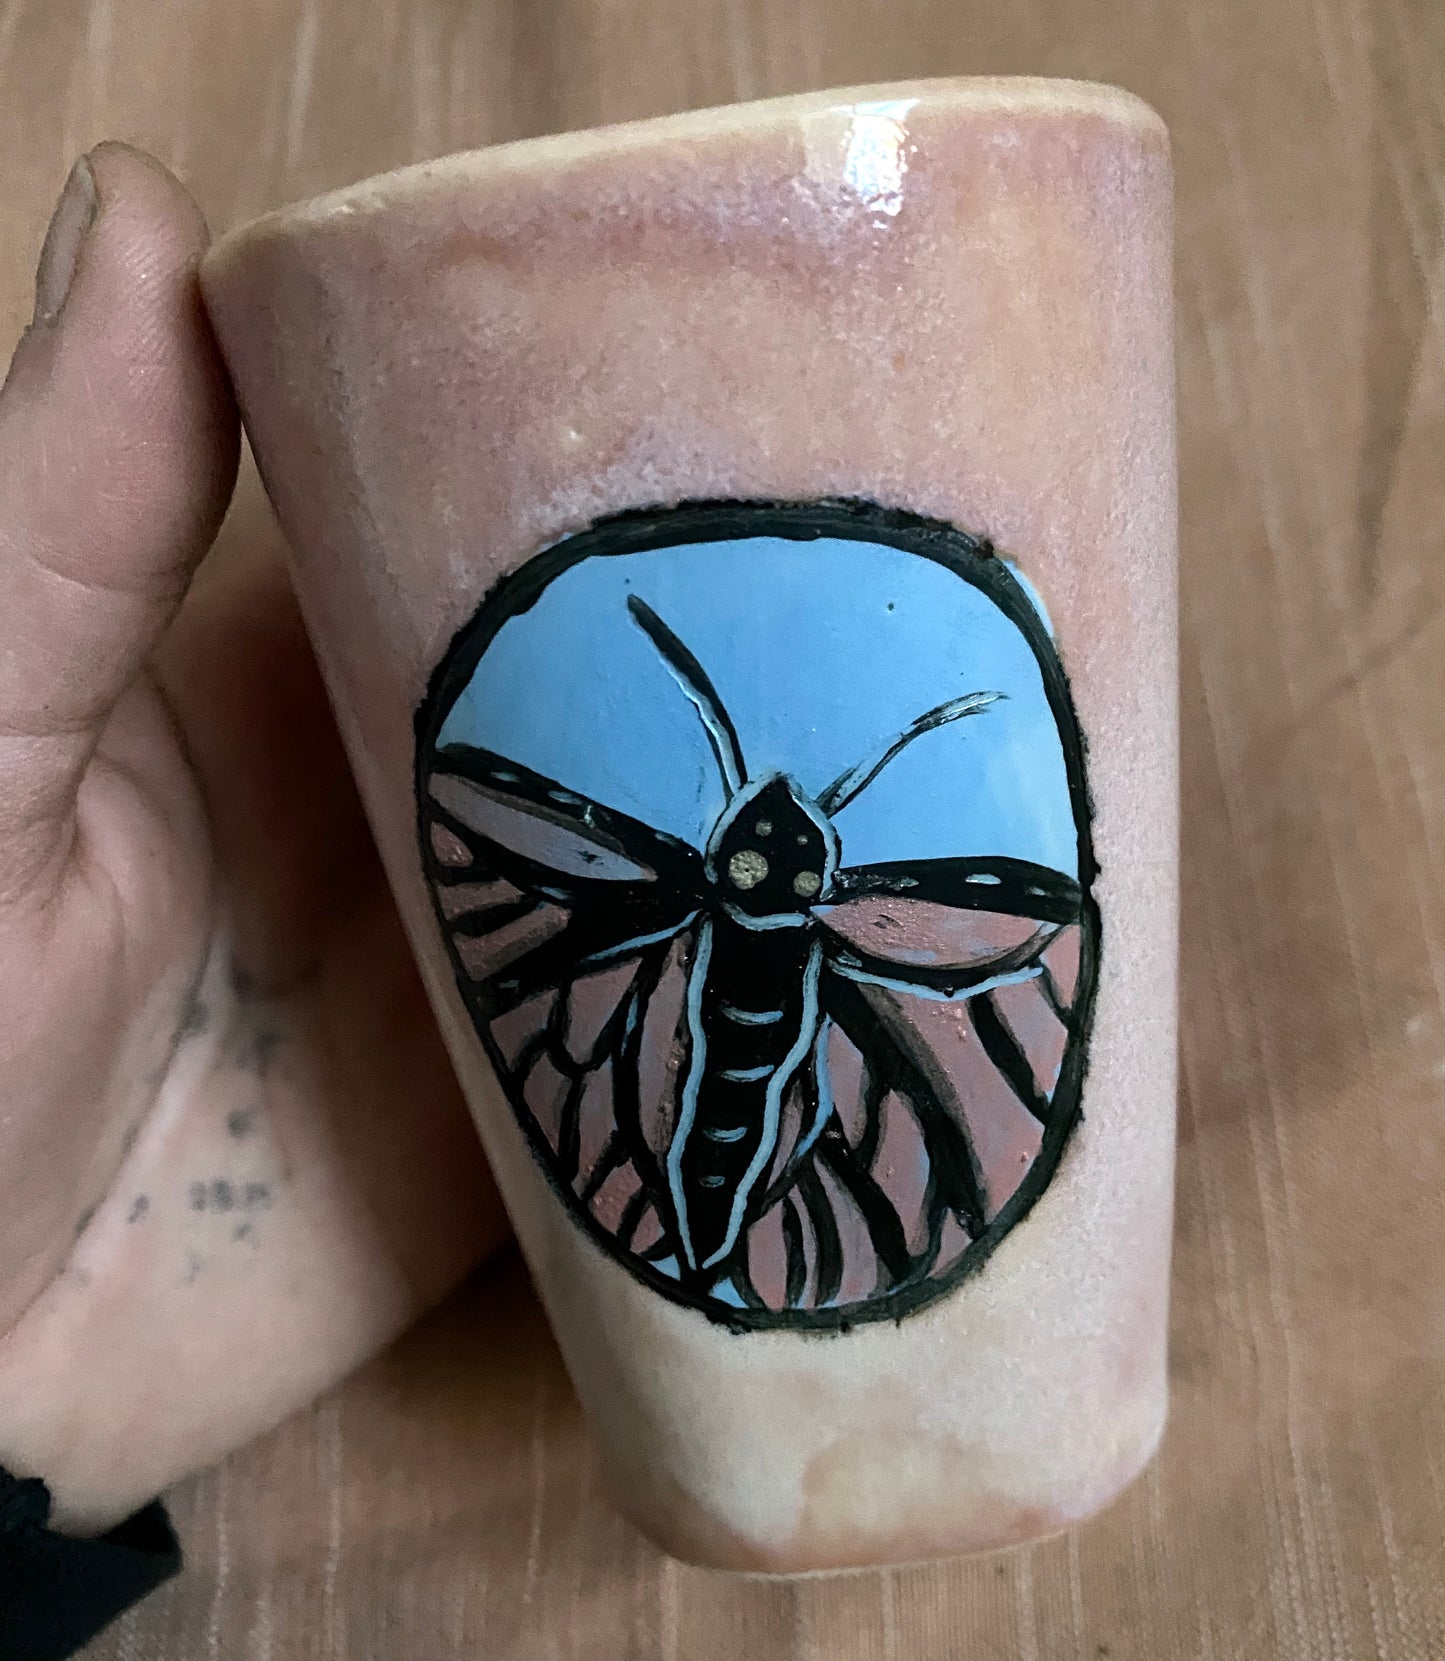 Butterfly cup